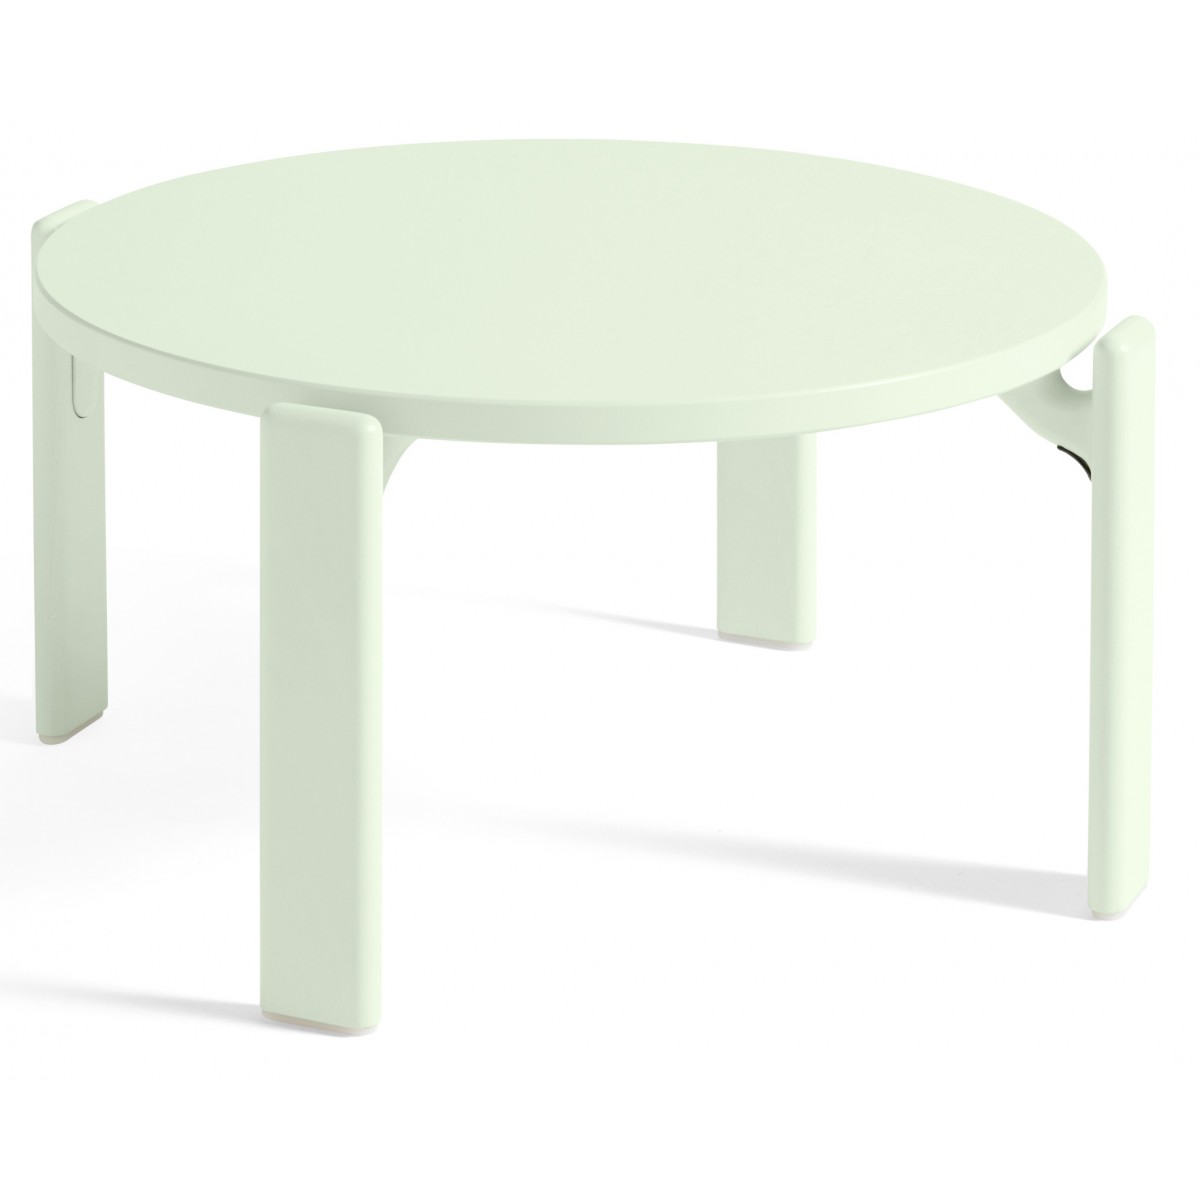 Soft mint - REY coffee table